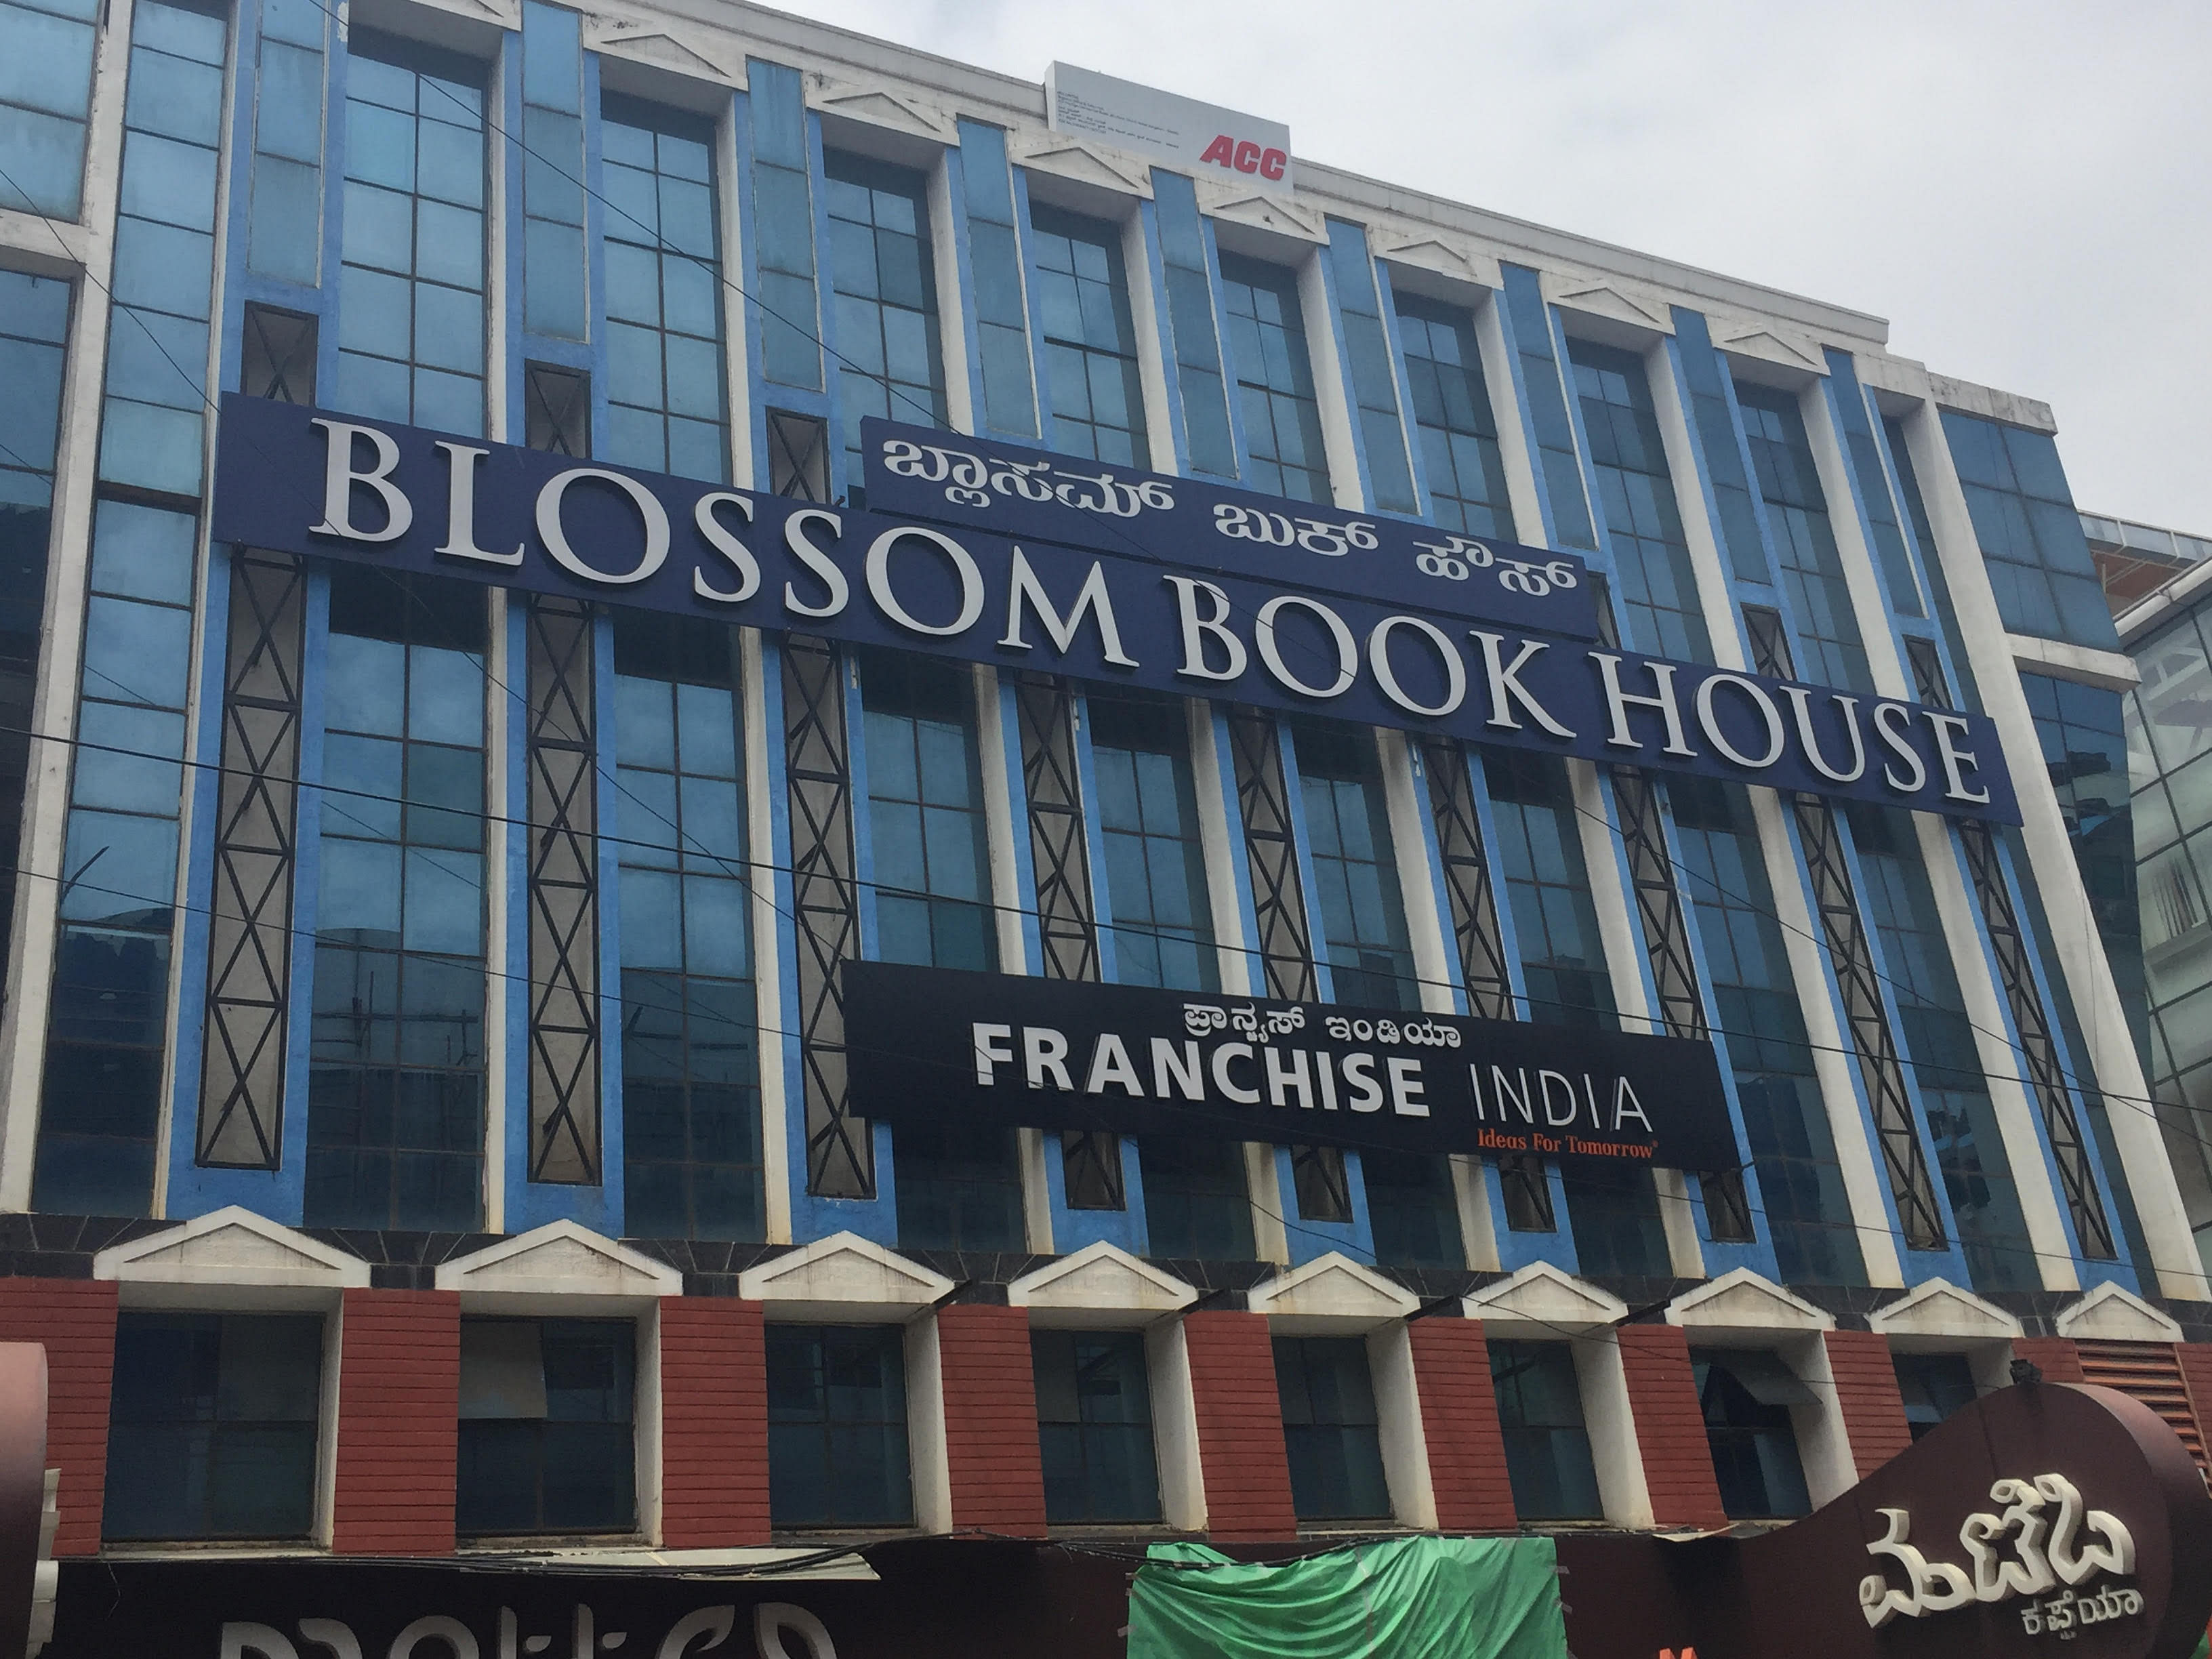 Blossom Book House is one of the places which doesn’t sell Kindle till now.